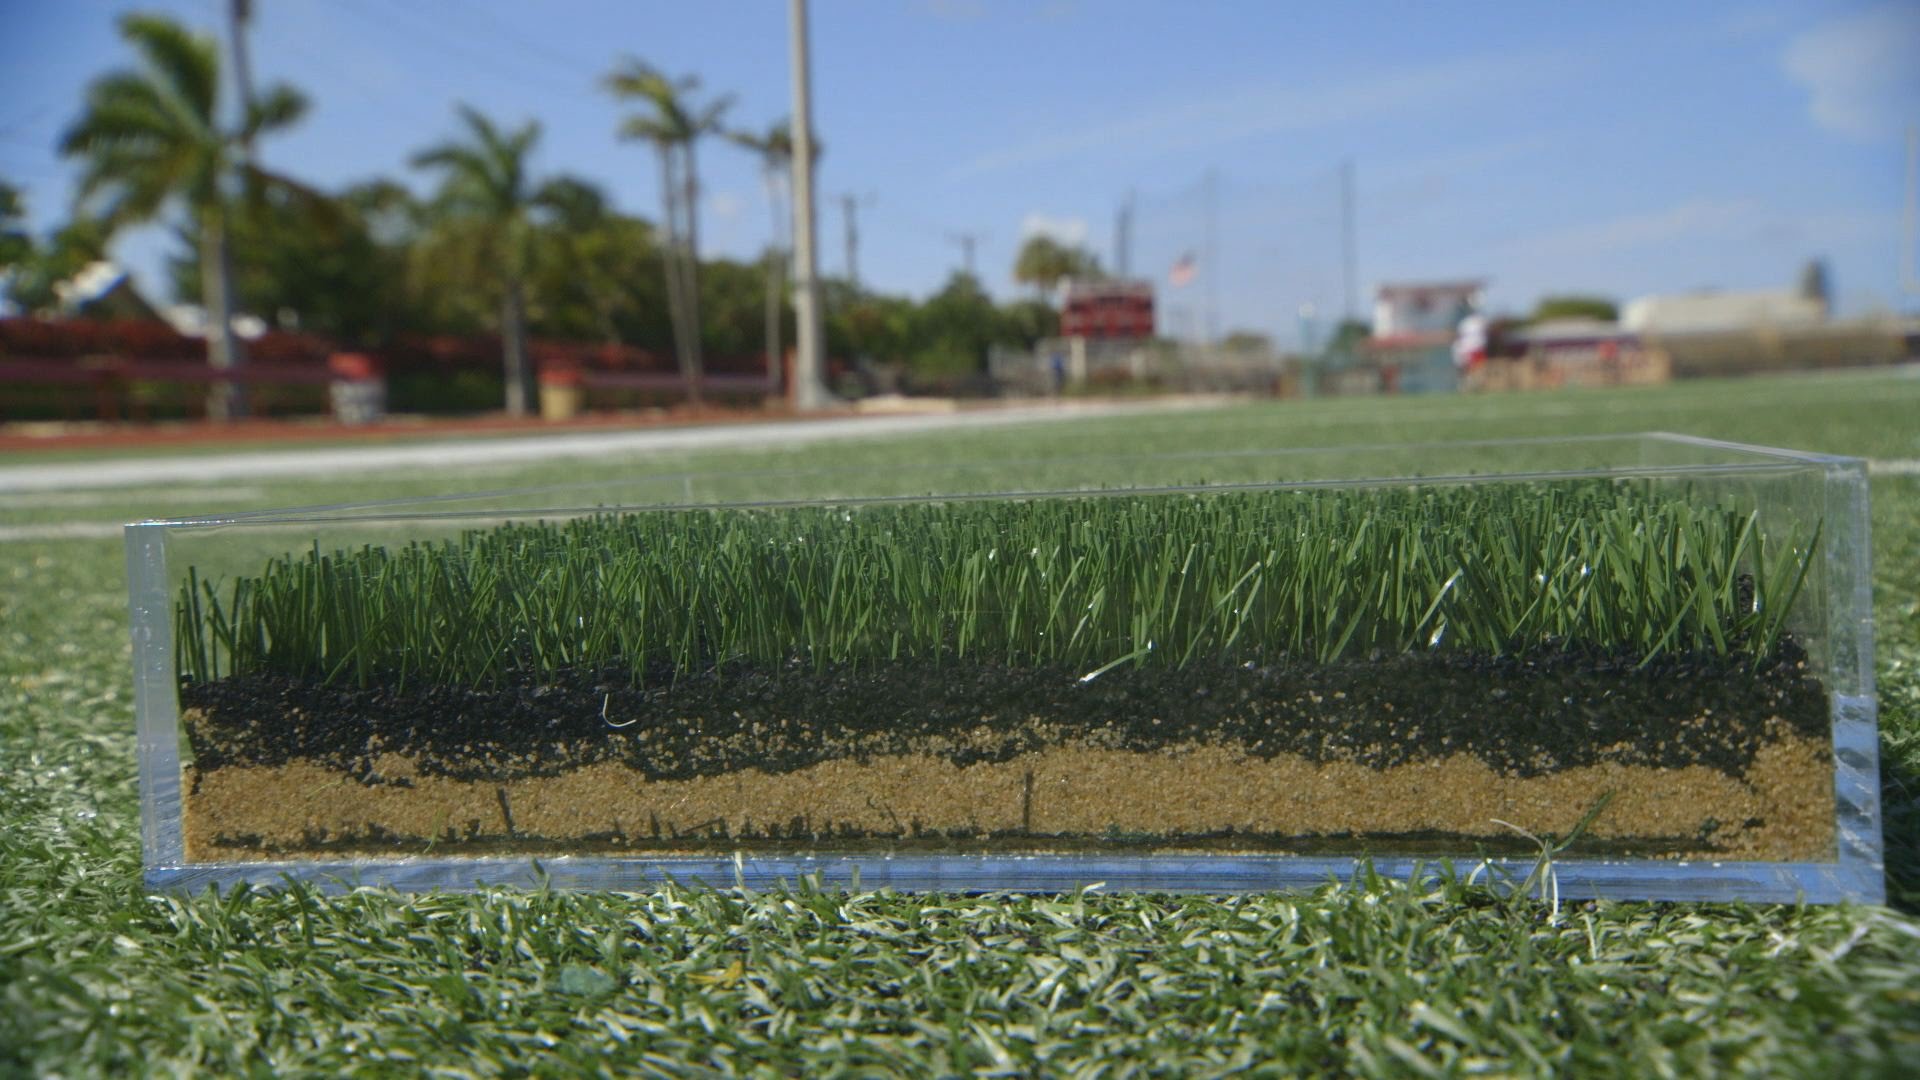 How AstroTurf Got Kicked Off the Field - YouTube